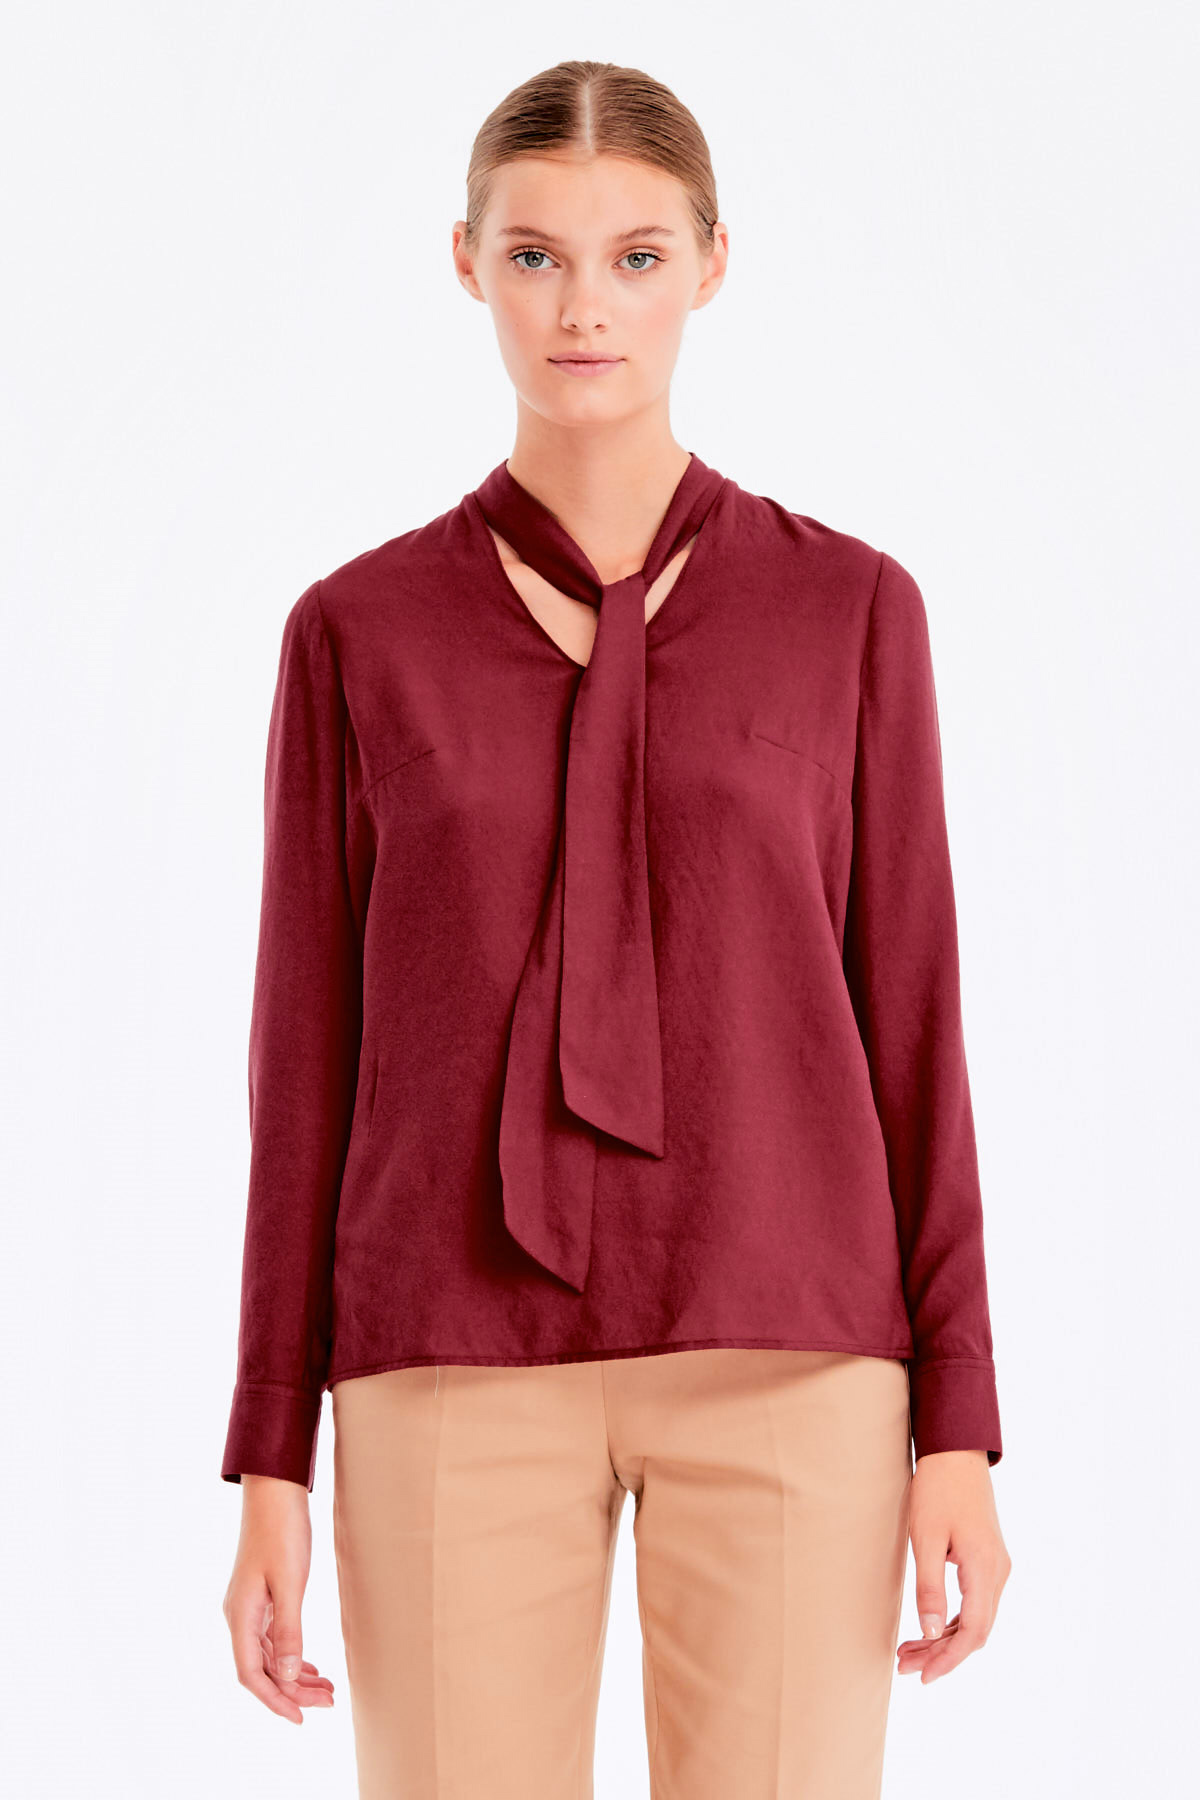 Burgundy blouse with ties, photo 2